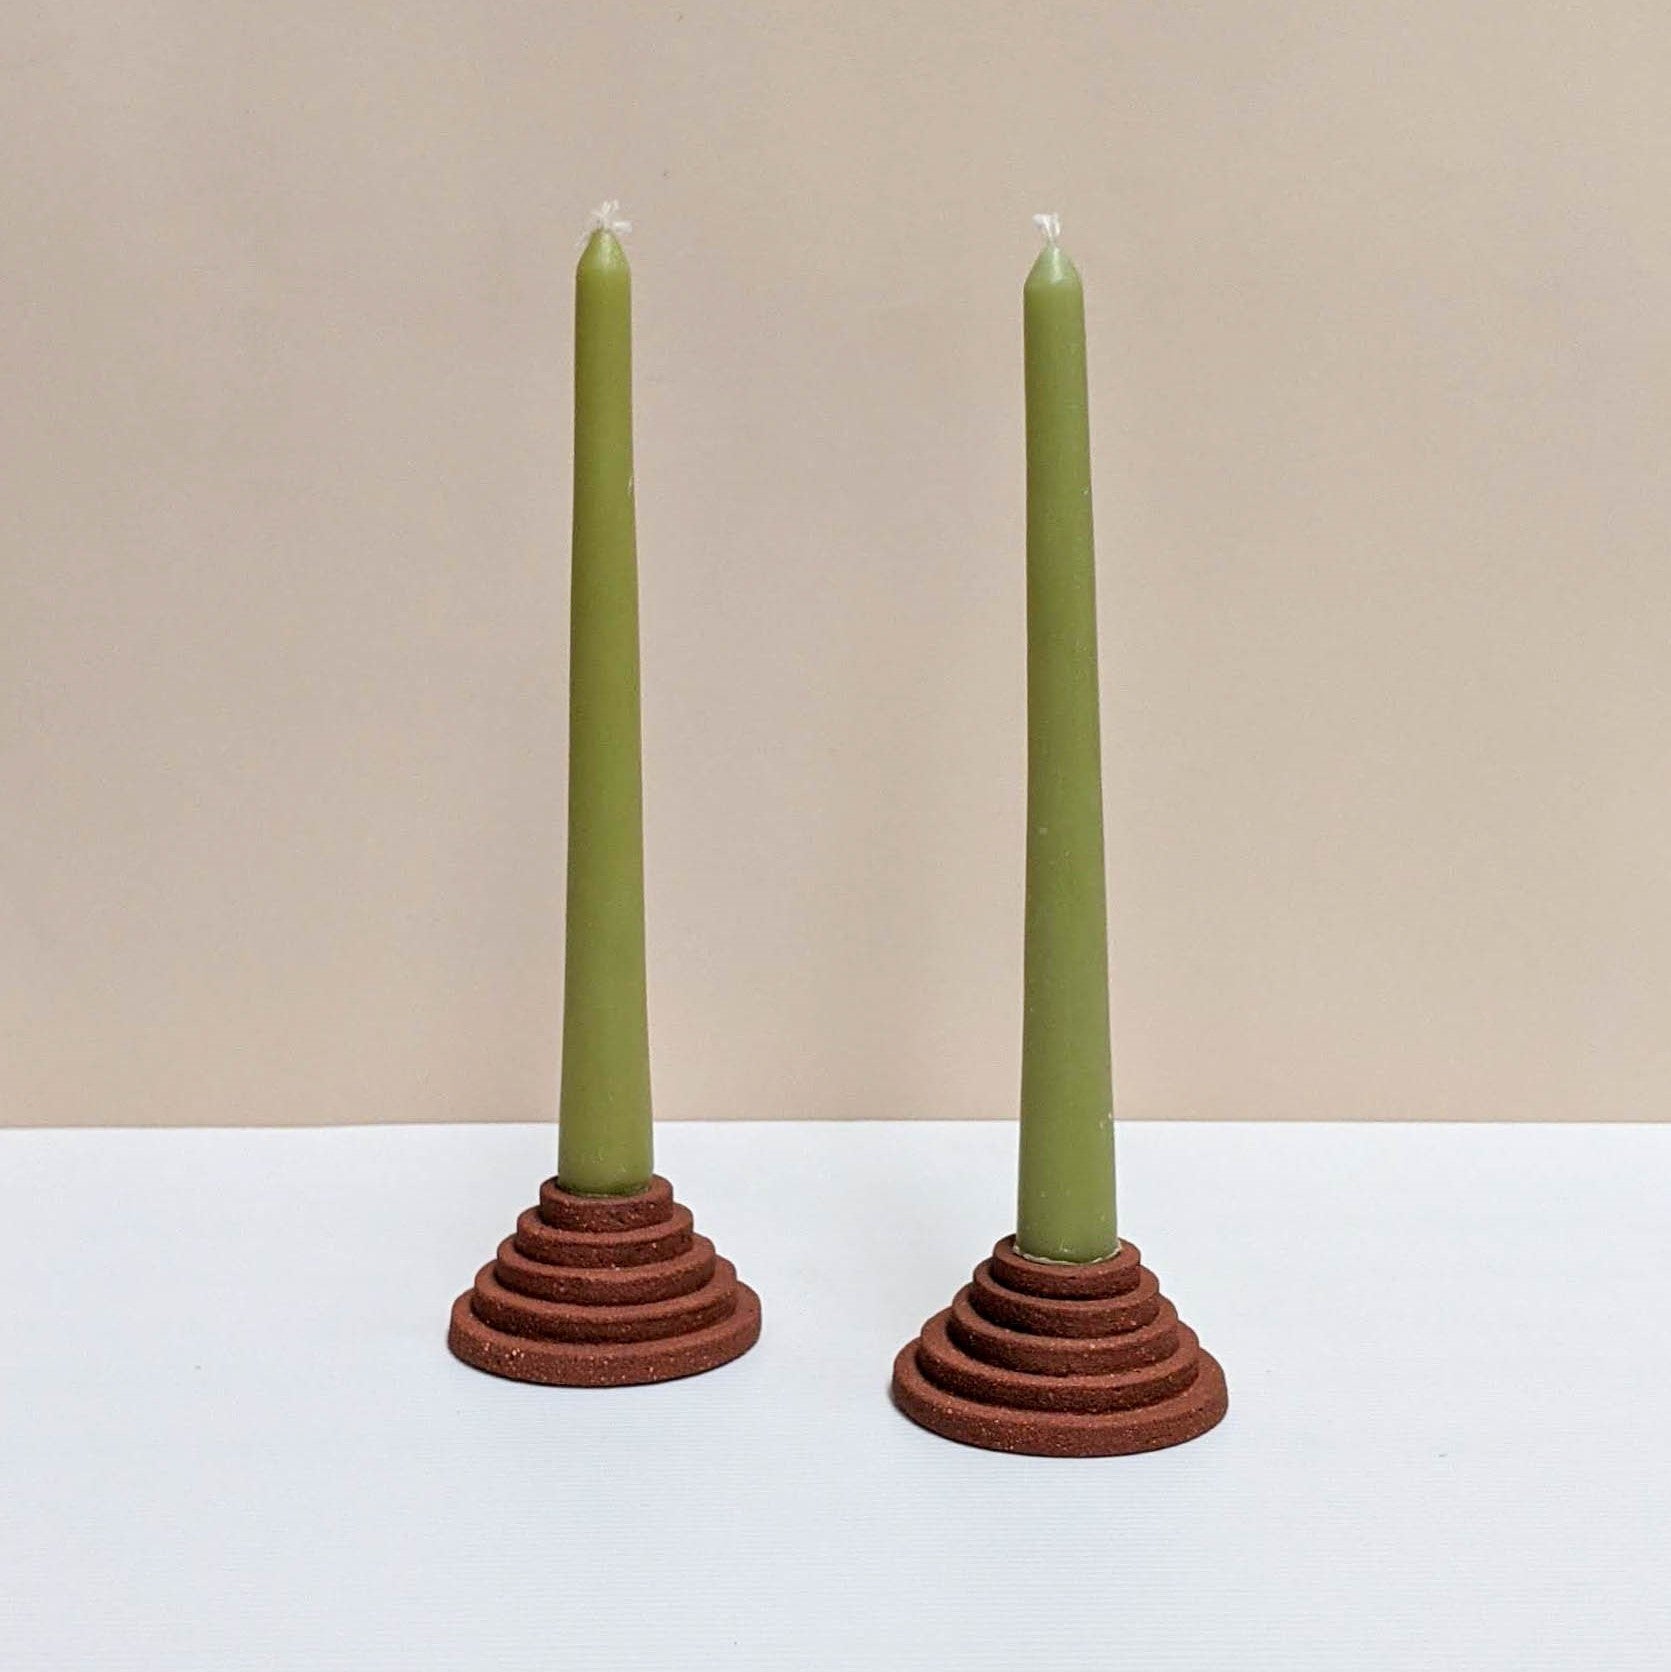 Two circular ceramic candle holders in terracotta.  Each candle features steps leading up to the candle. Both of the candle holders have green unlit candles and are sitting on a white and cream backdrop. 